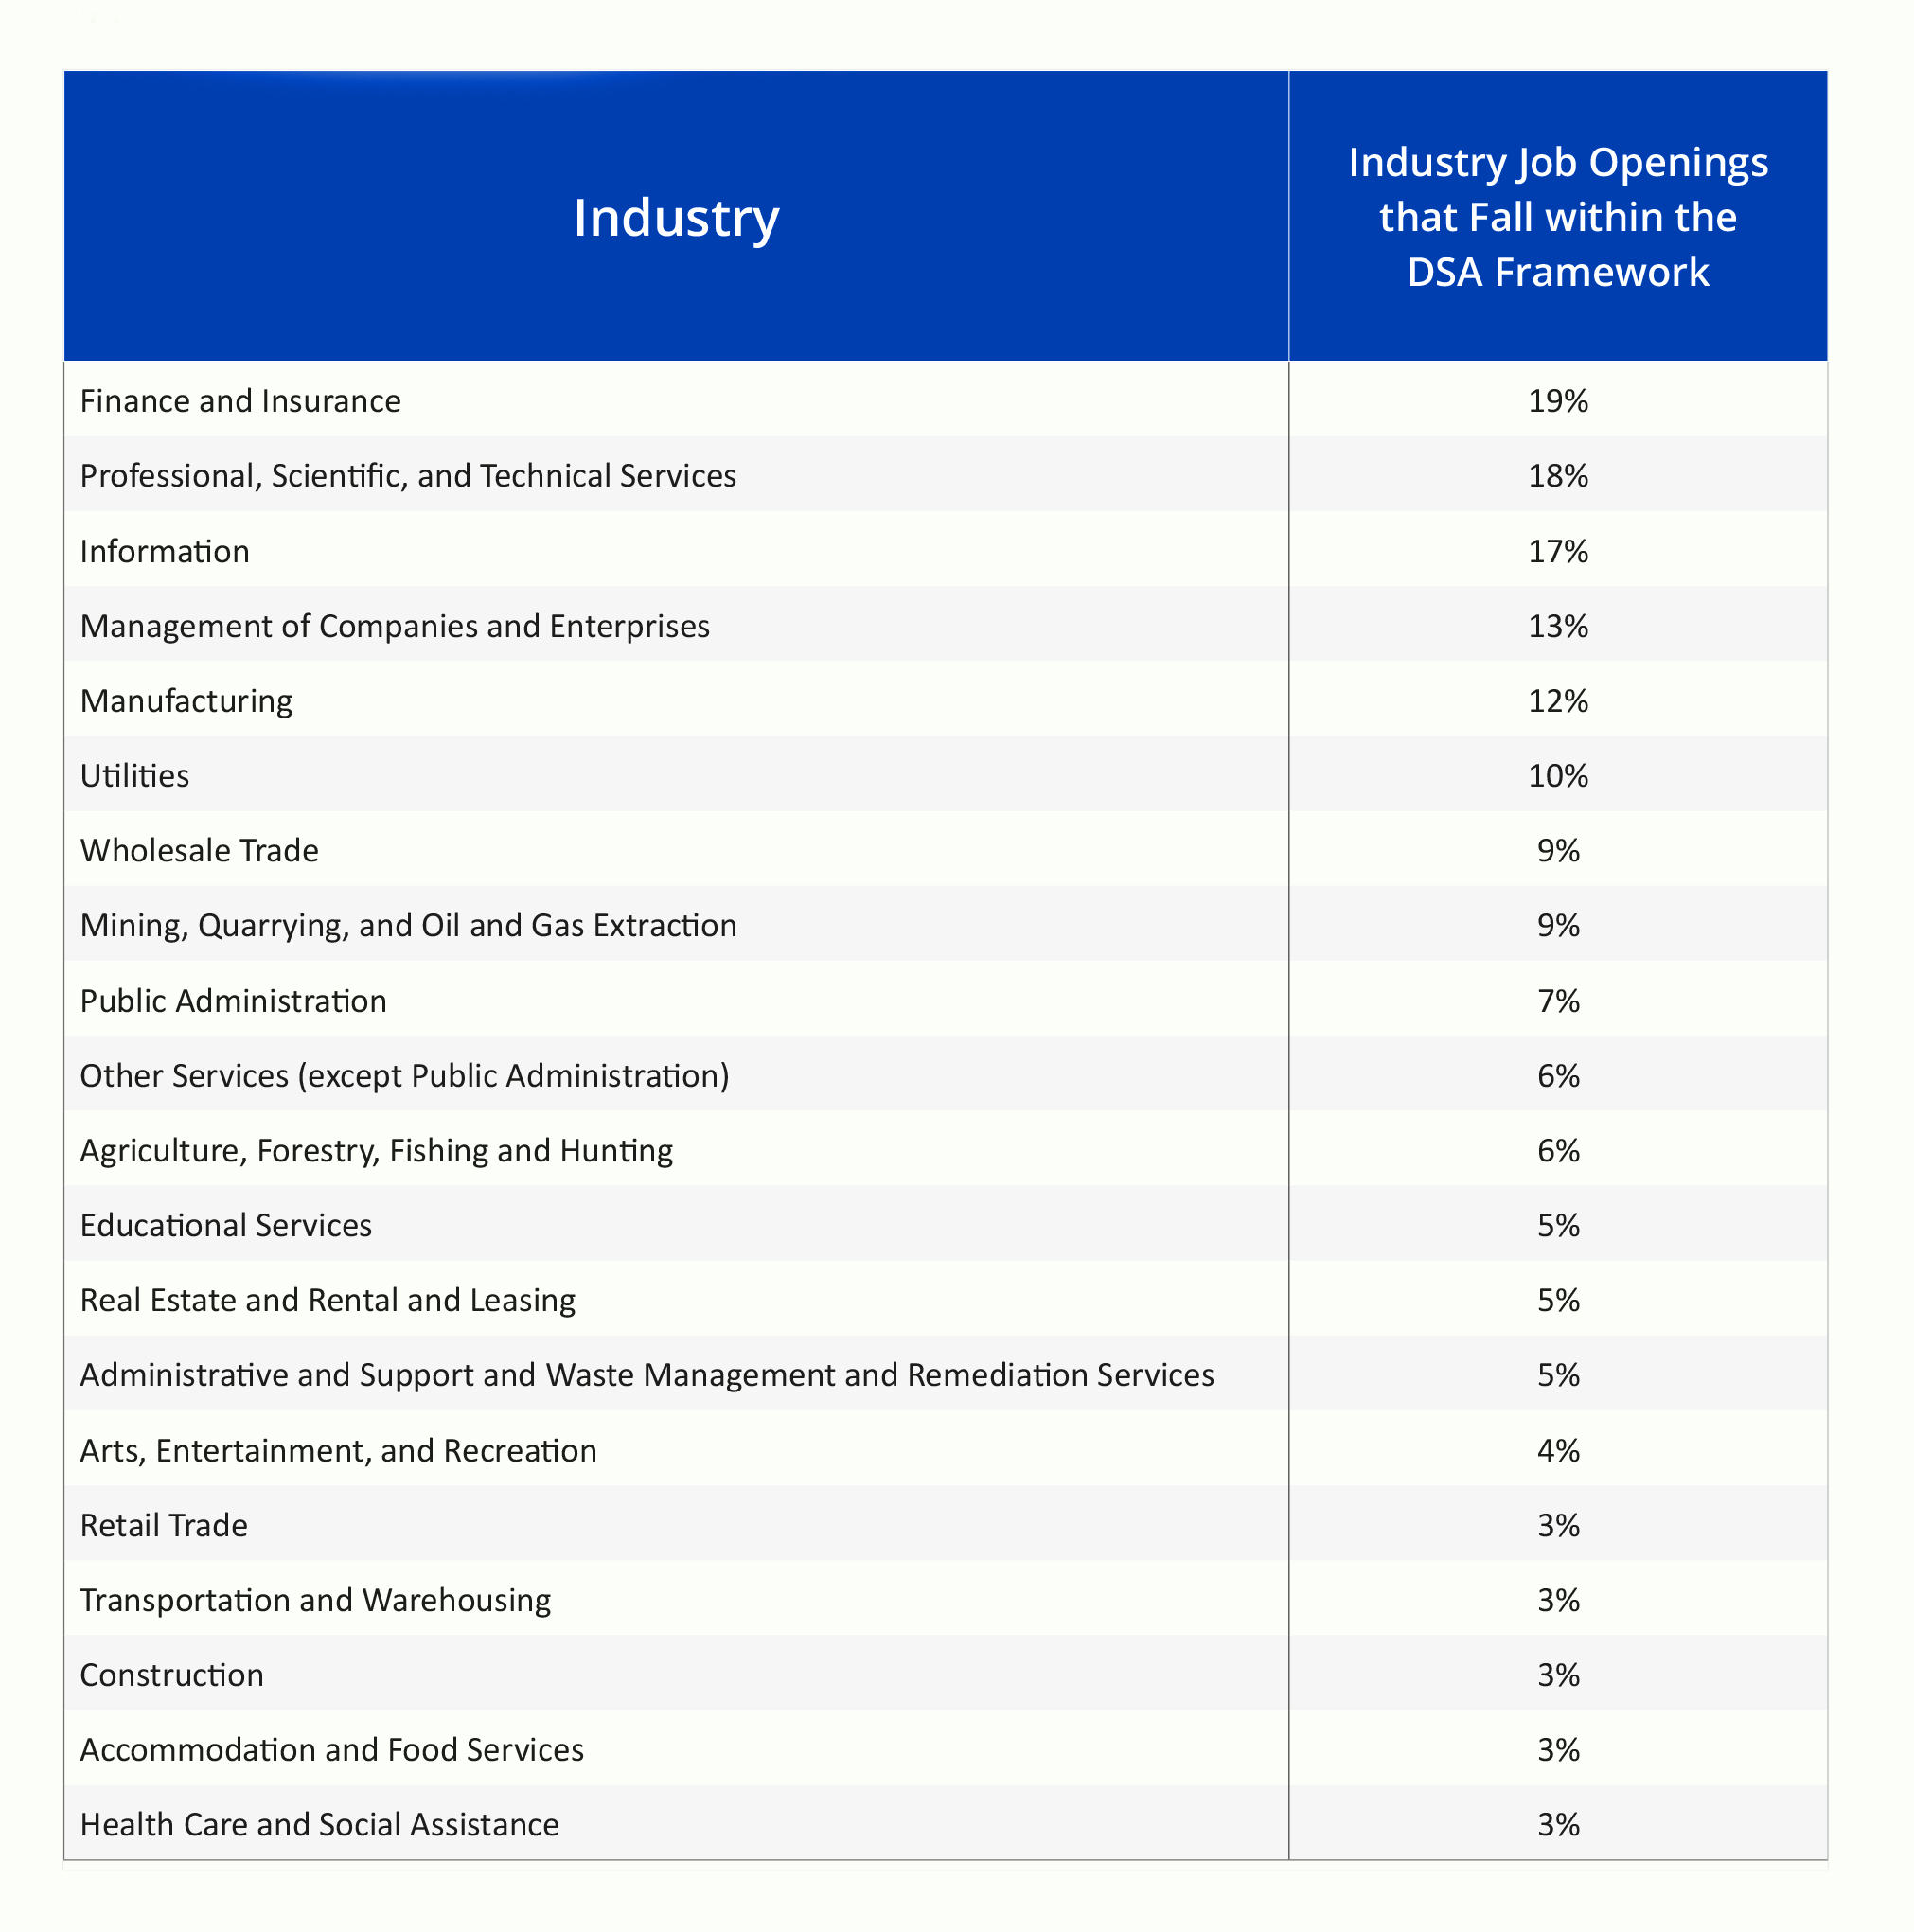 Demand for Data Science as per industry